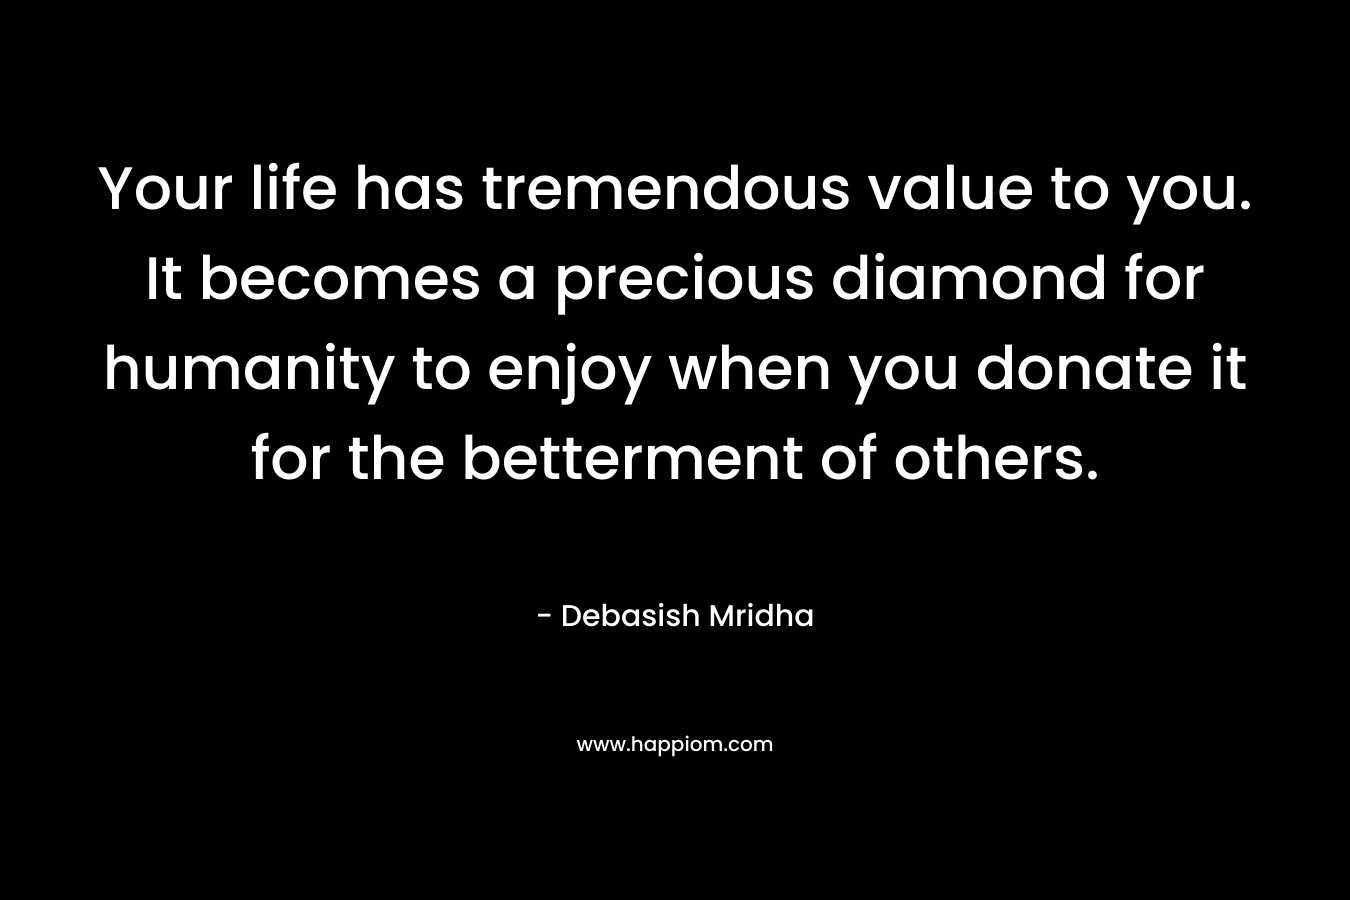 Your life has tremendous value to you. It becomes a precious diamond for humanity to enjoy when you donate it for the betterment of others.